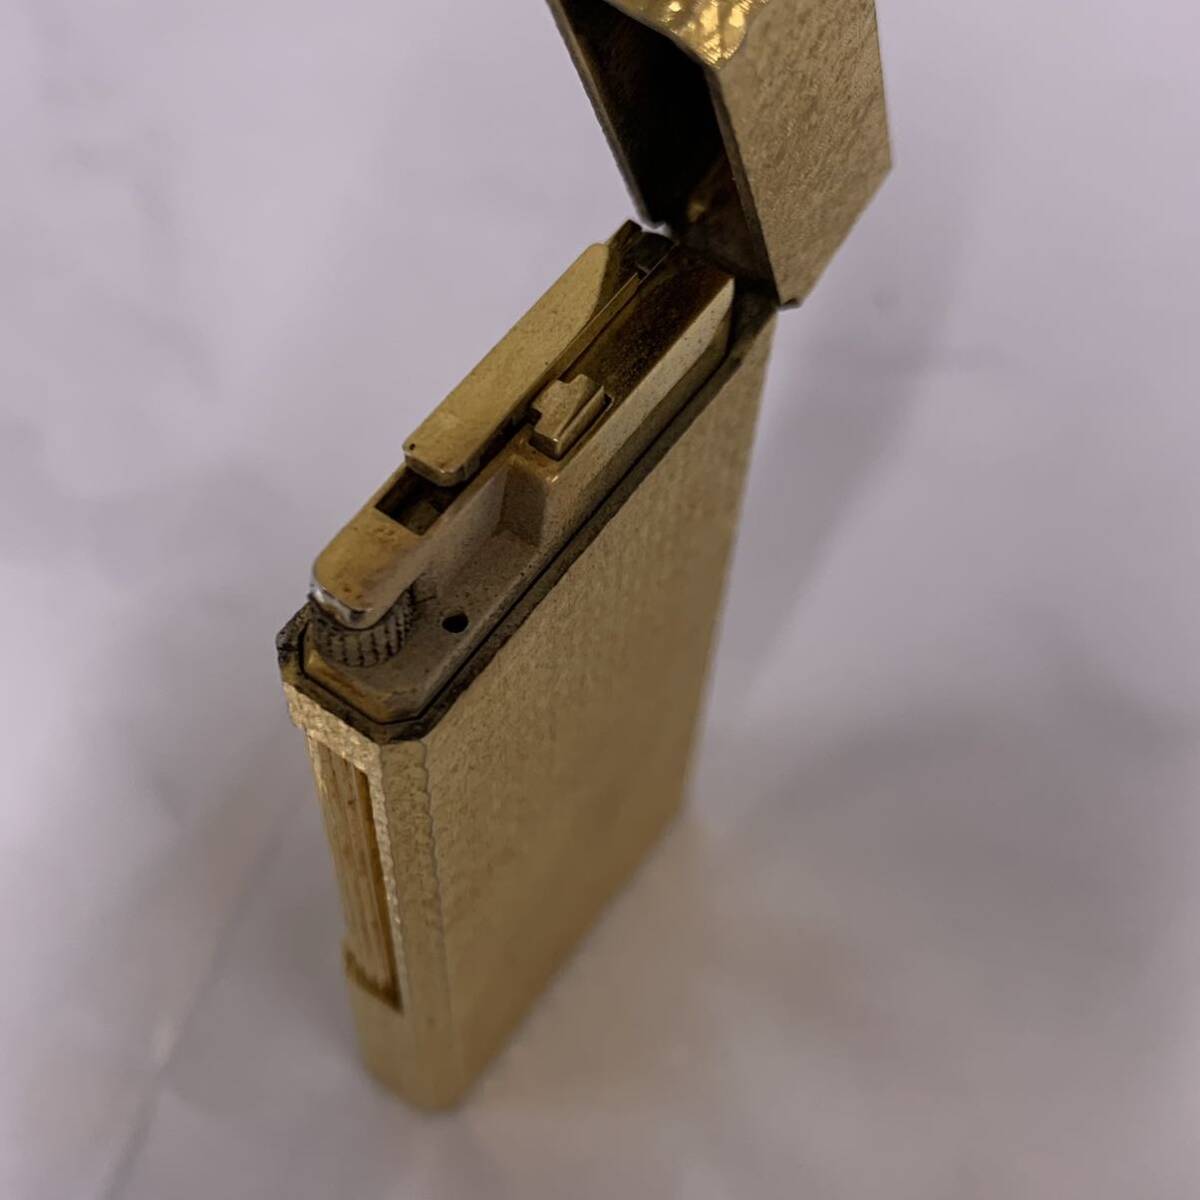  fire kind not yet verification smoking .GIVENCHY/ Givenchy 2000 gas lighter Gold color present condition goods ka4